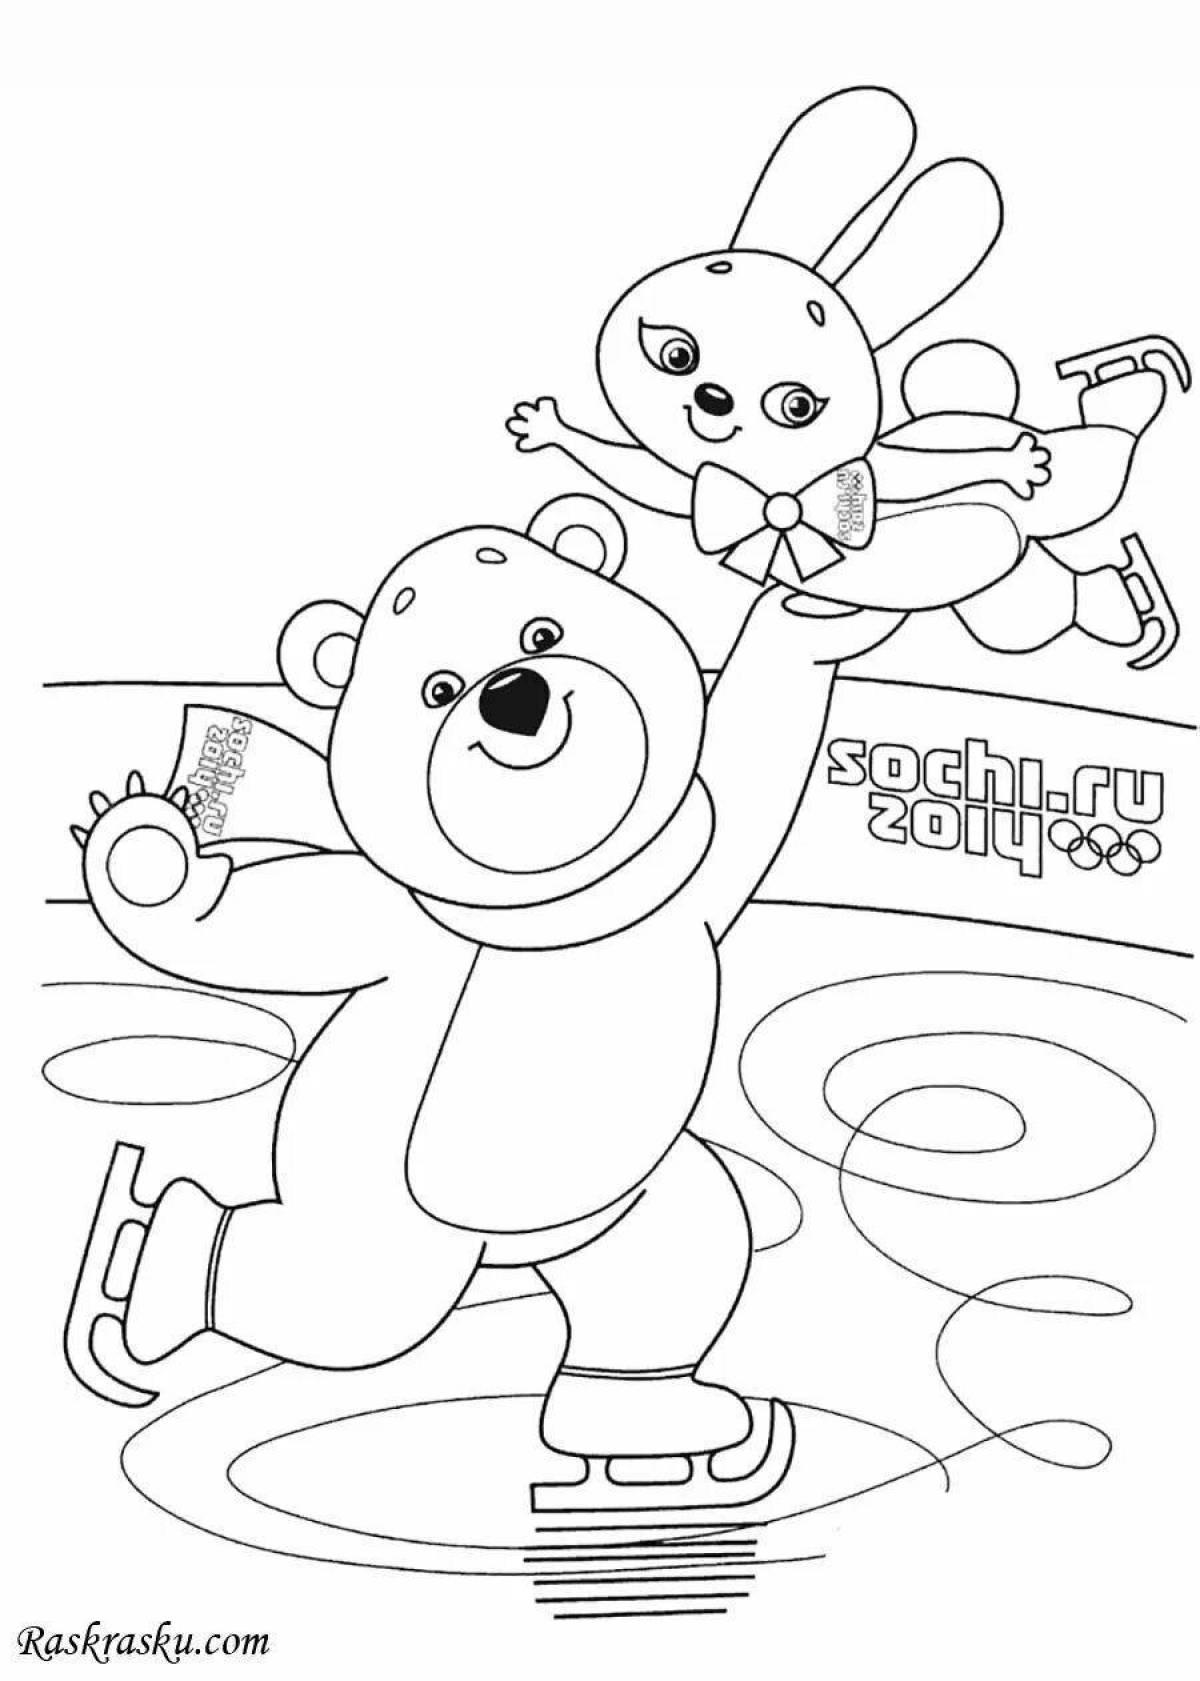 Coloring page spicy bear on skis